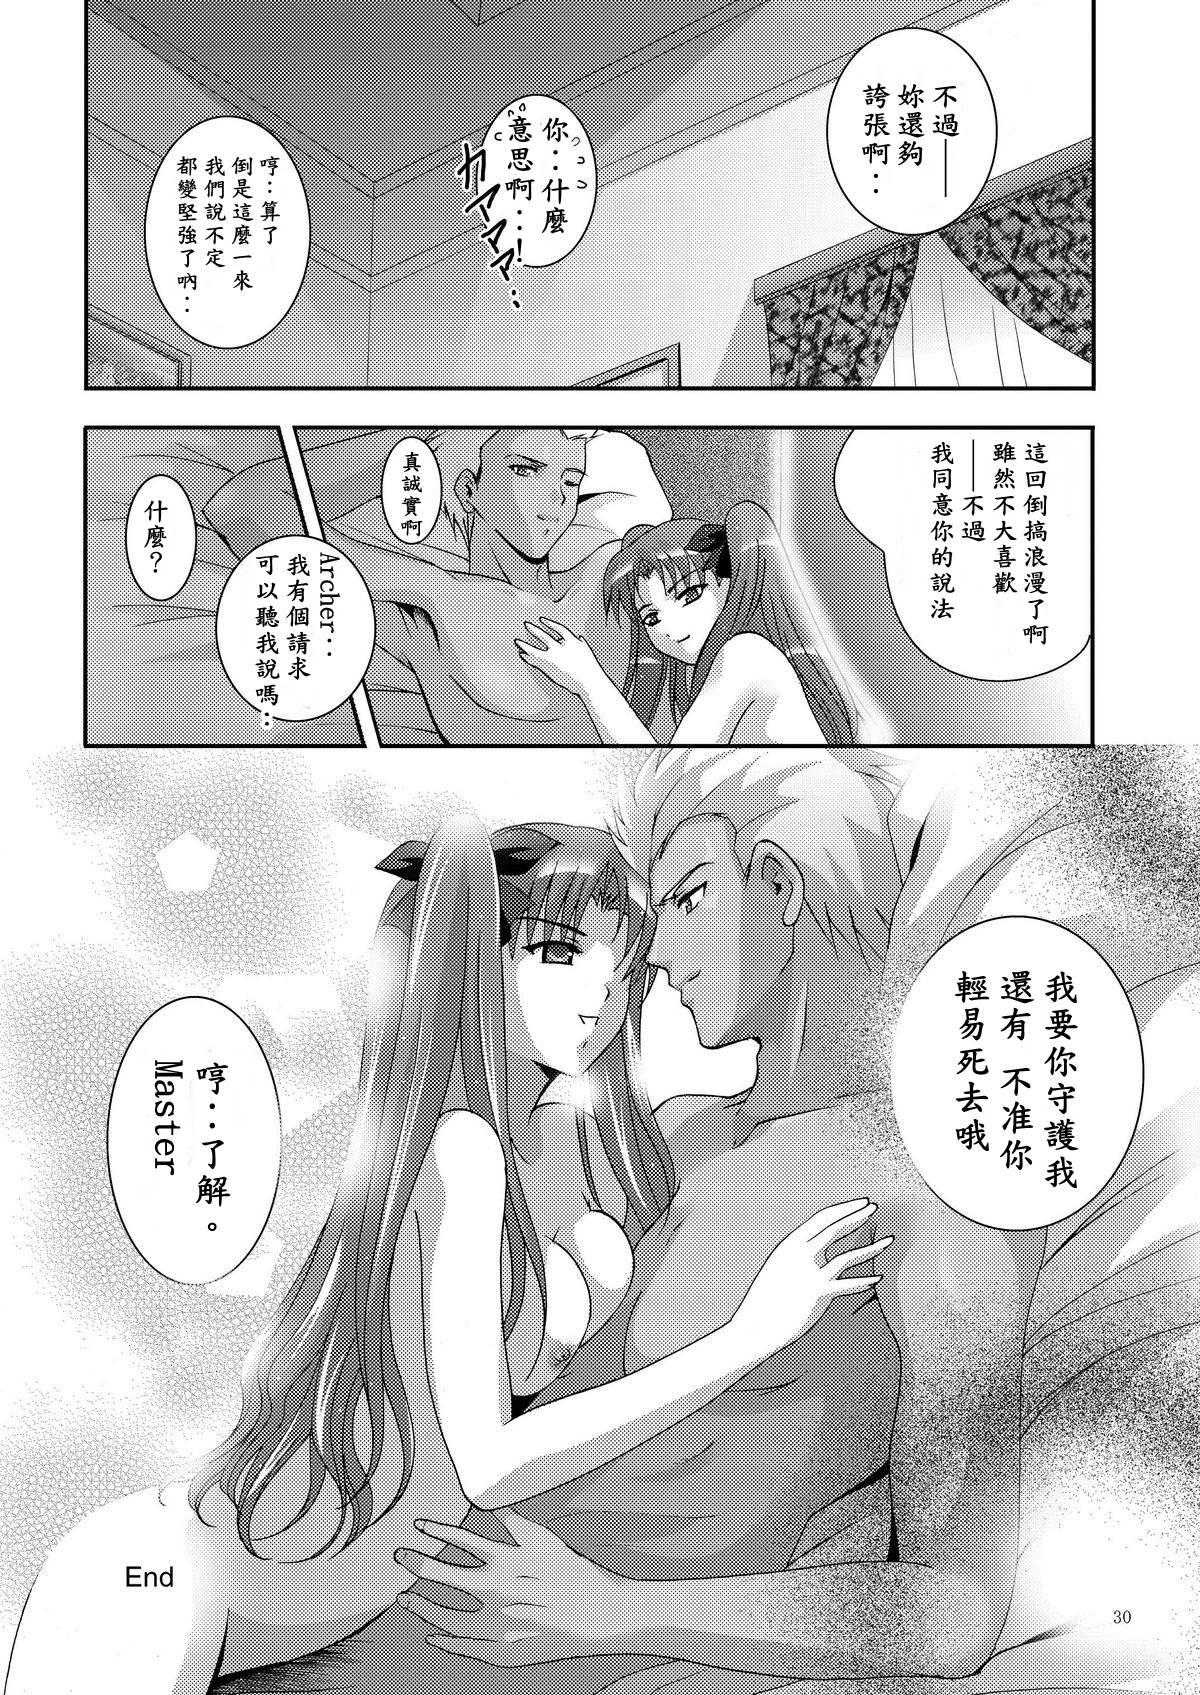 Casada MOUSOU THEATER 19 - Fate stay night Amateurs Gone Wild - Page 28